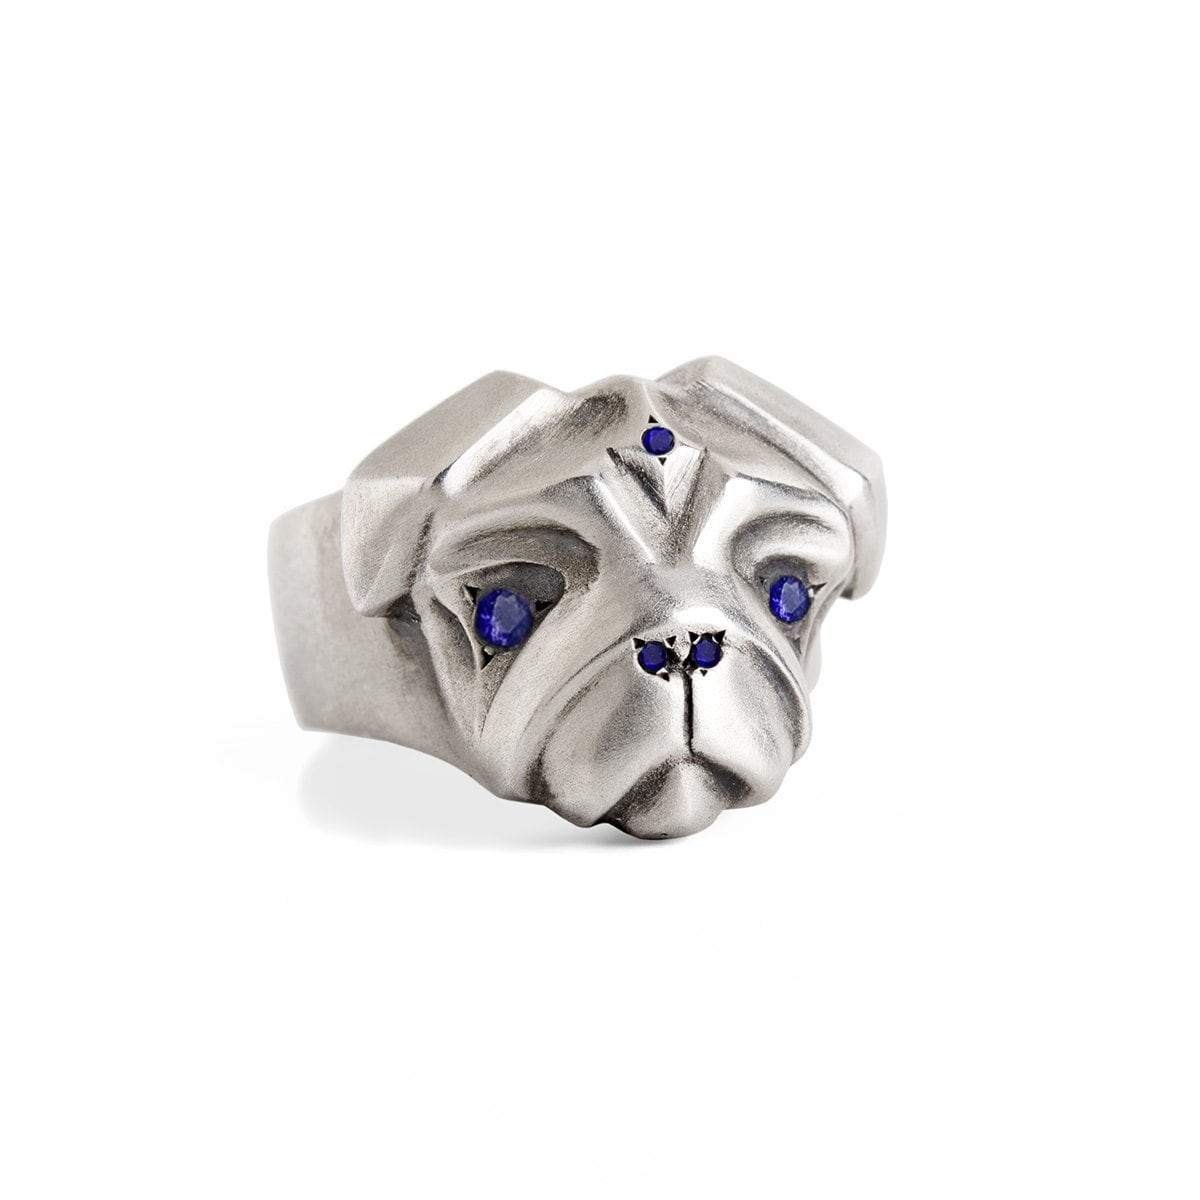 ELINA GLEIZER Jewelry Select your size Pug Ring with Blue Sapphires